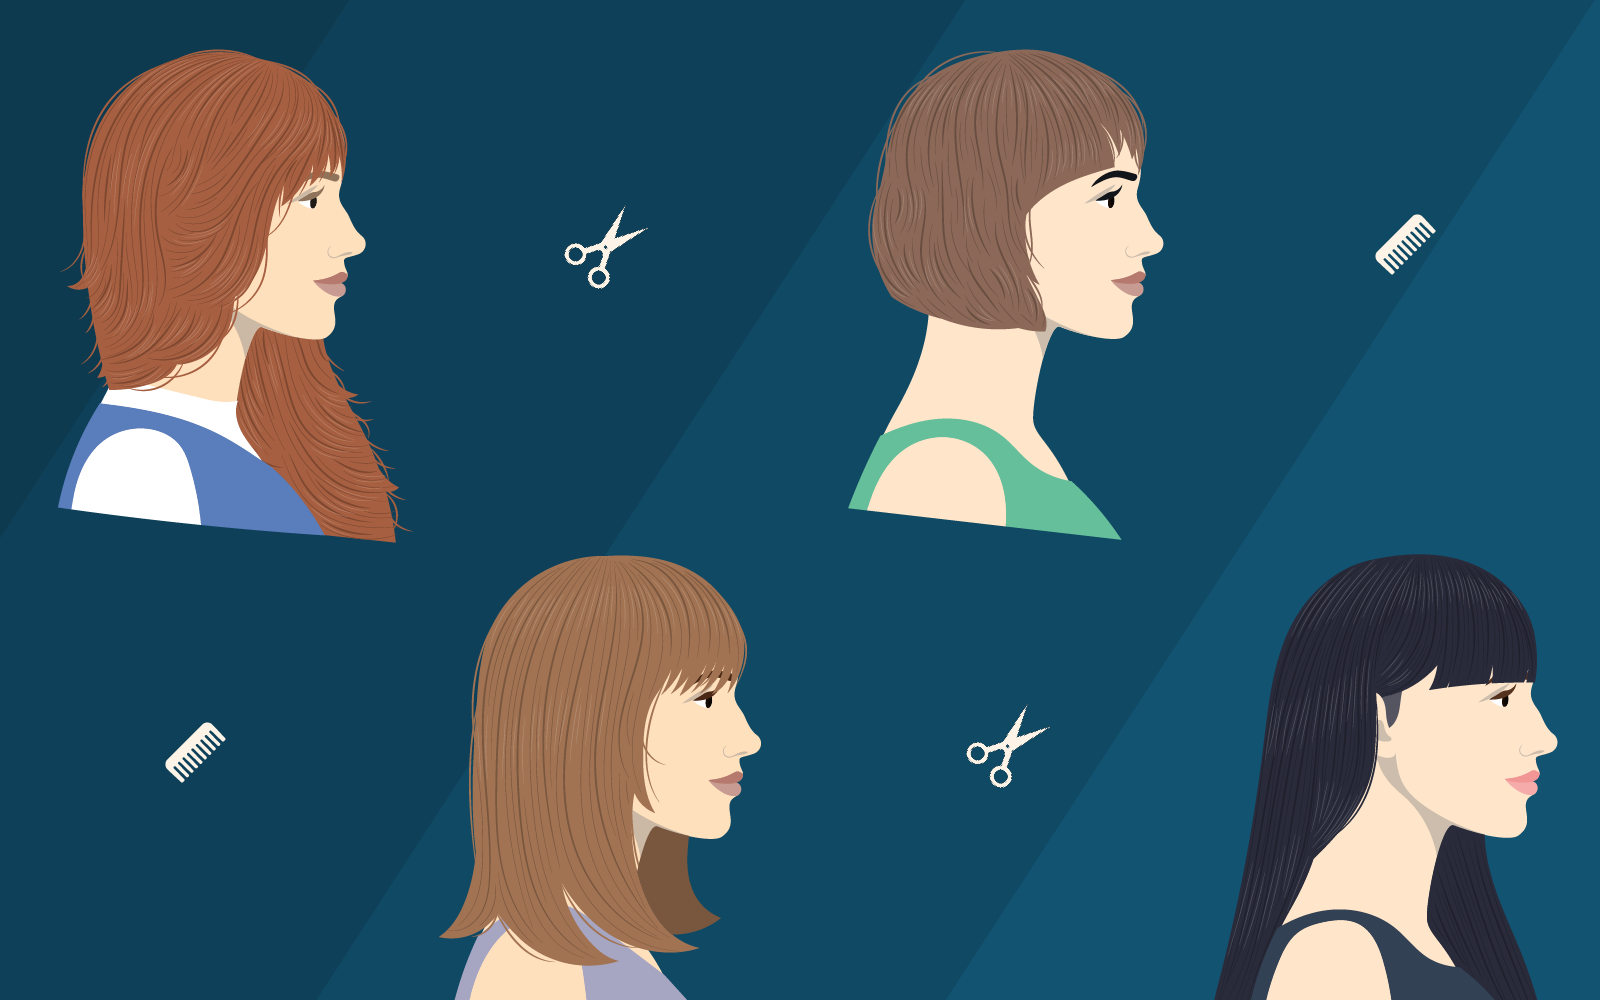 Are Bangs in Style in 2022? | You Bet They Are!